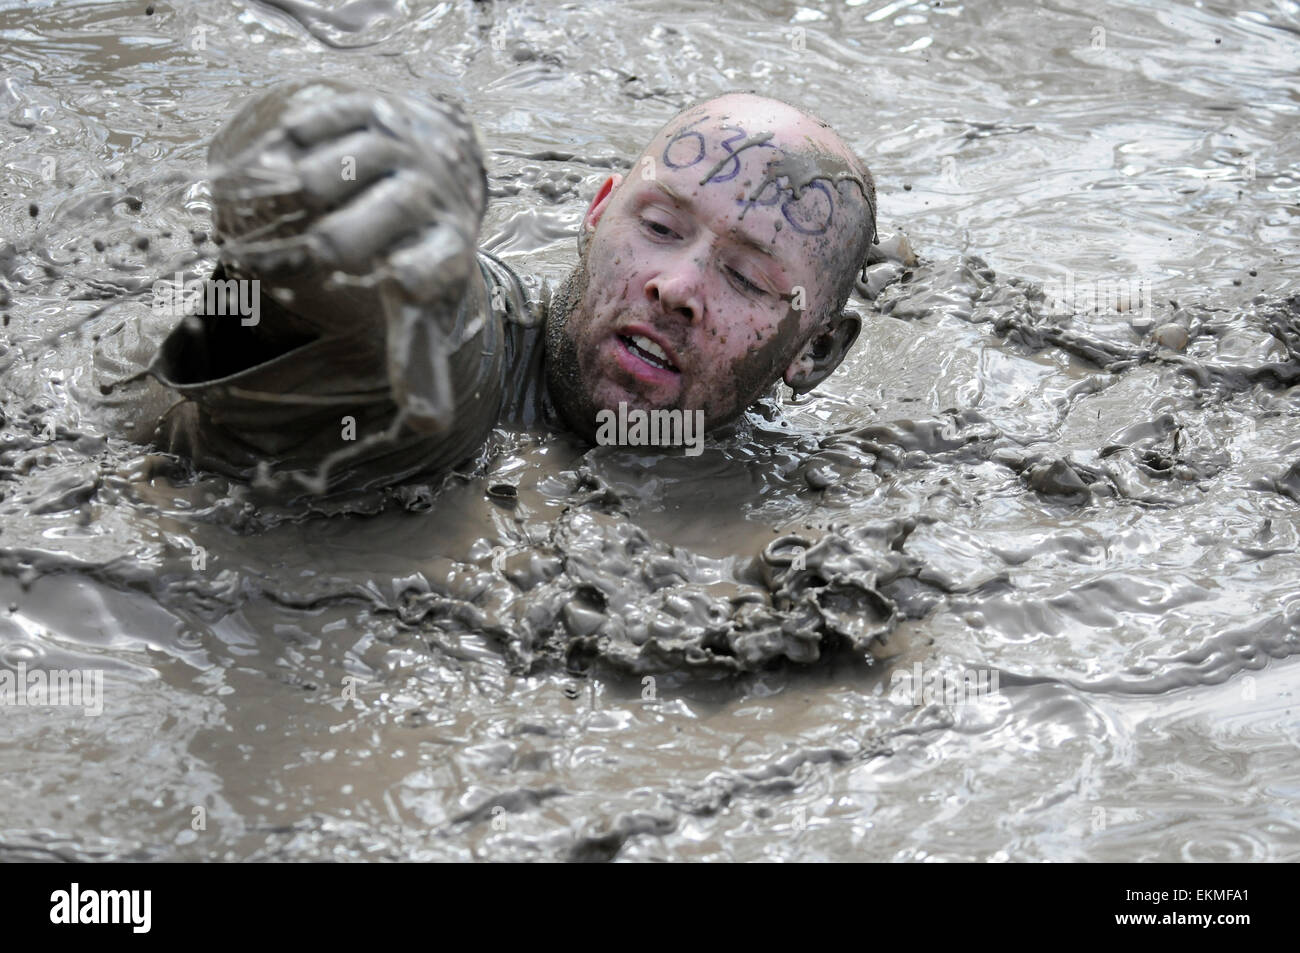 Swimming through the mud lake, runner at obstacle course race, UK Stock Photo